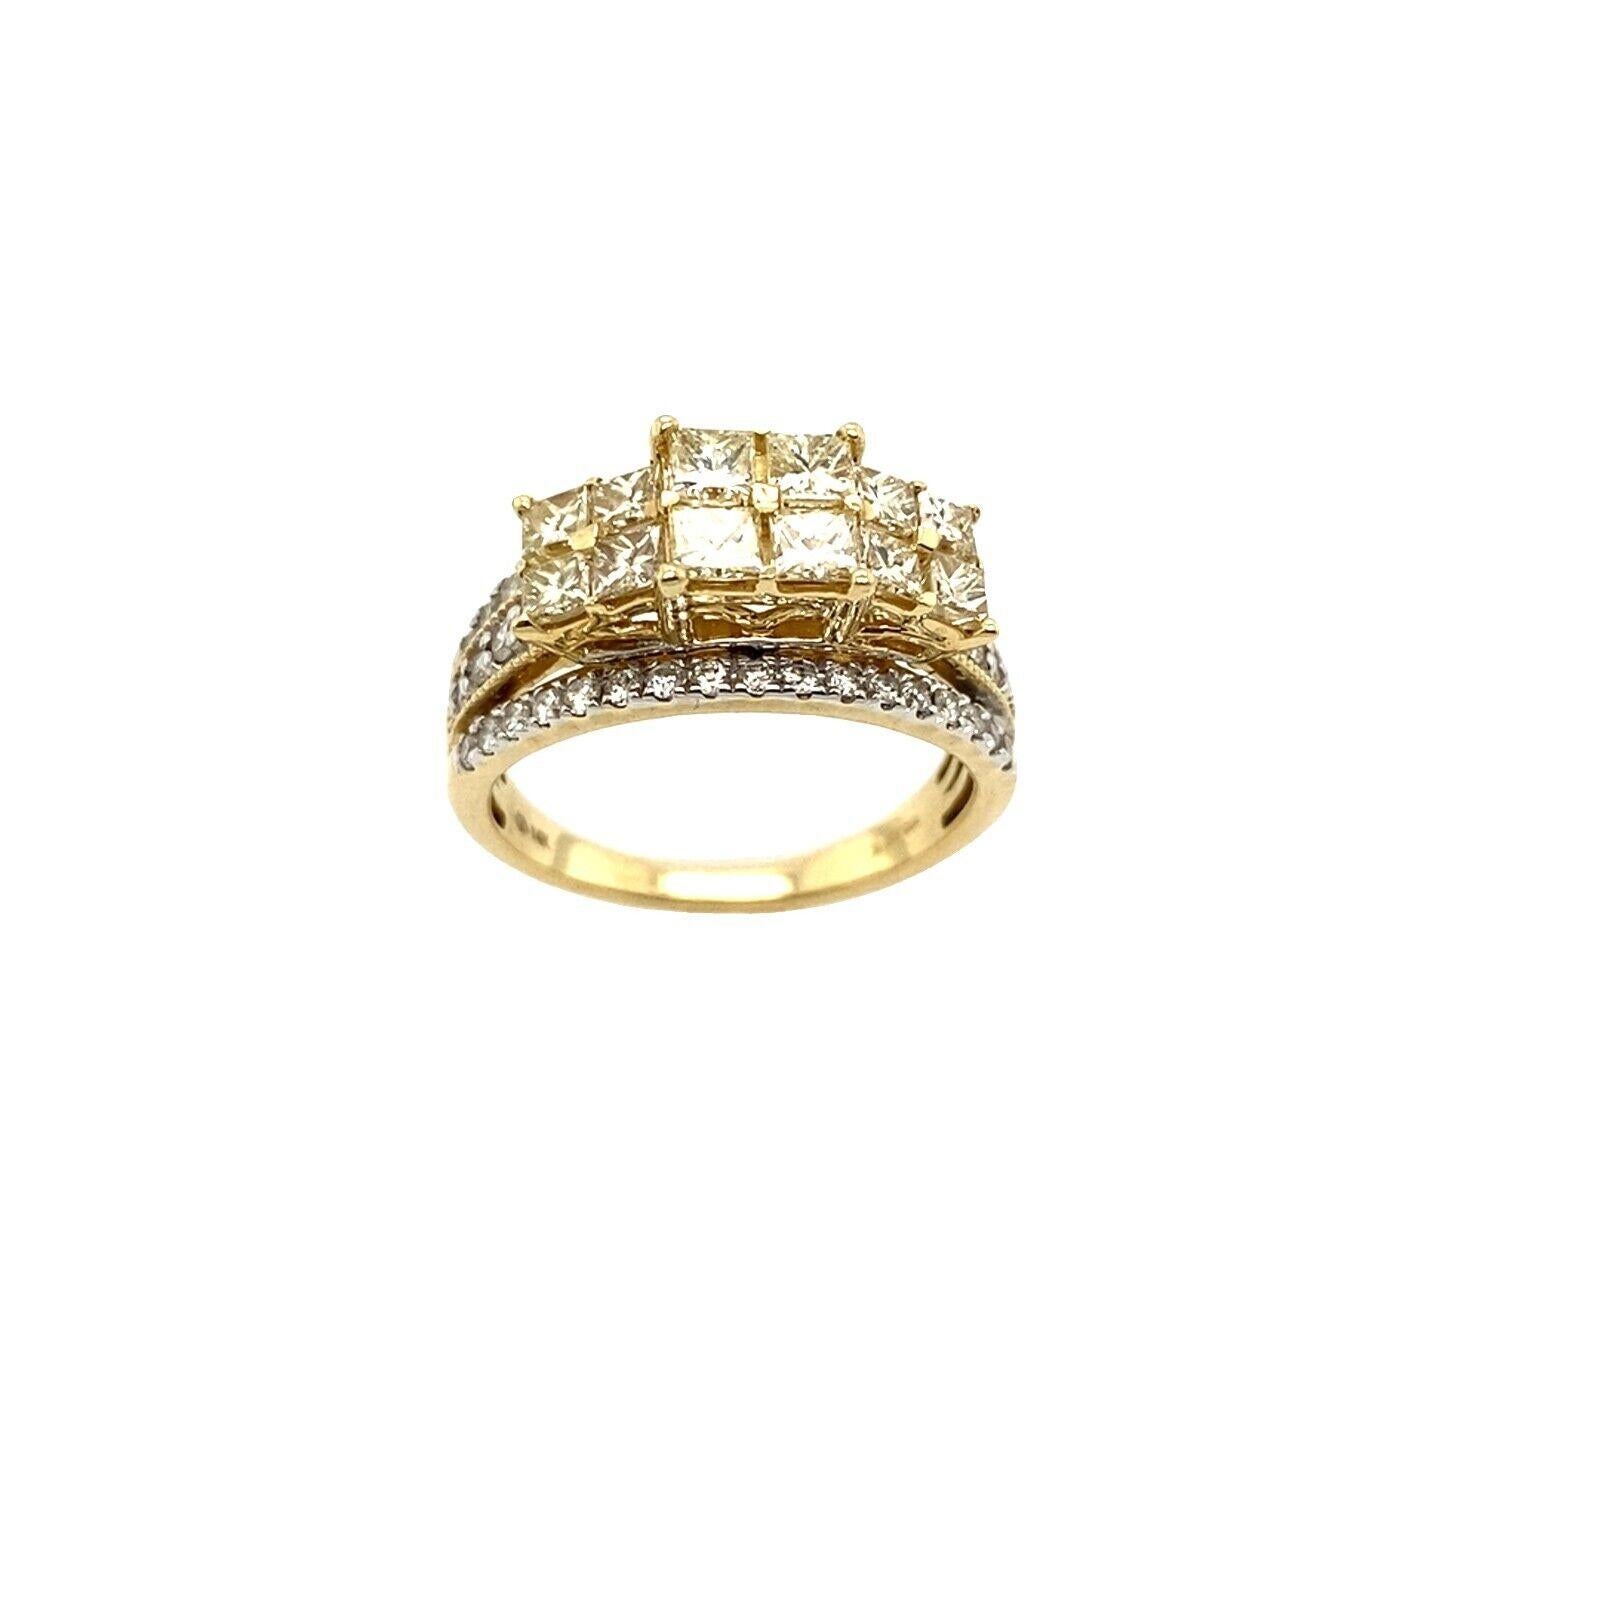 This magnificent natural yellow diamond princess cut trilogy ring is set with three bands of round Diamonds. The ring is set in 14ct YellowGold.

Additional Information:
Total Diamond Weight: 1.50ct (Princess yellow diamonds) + 0.50ct (round white